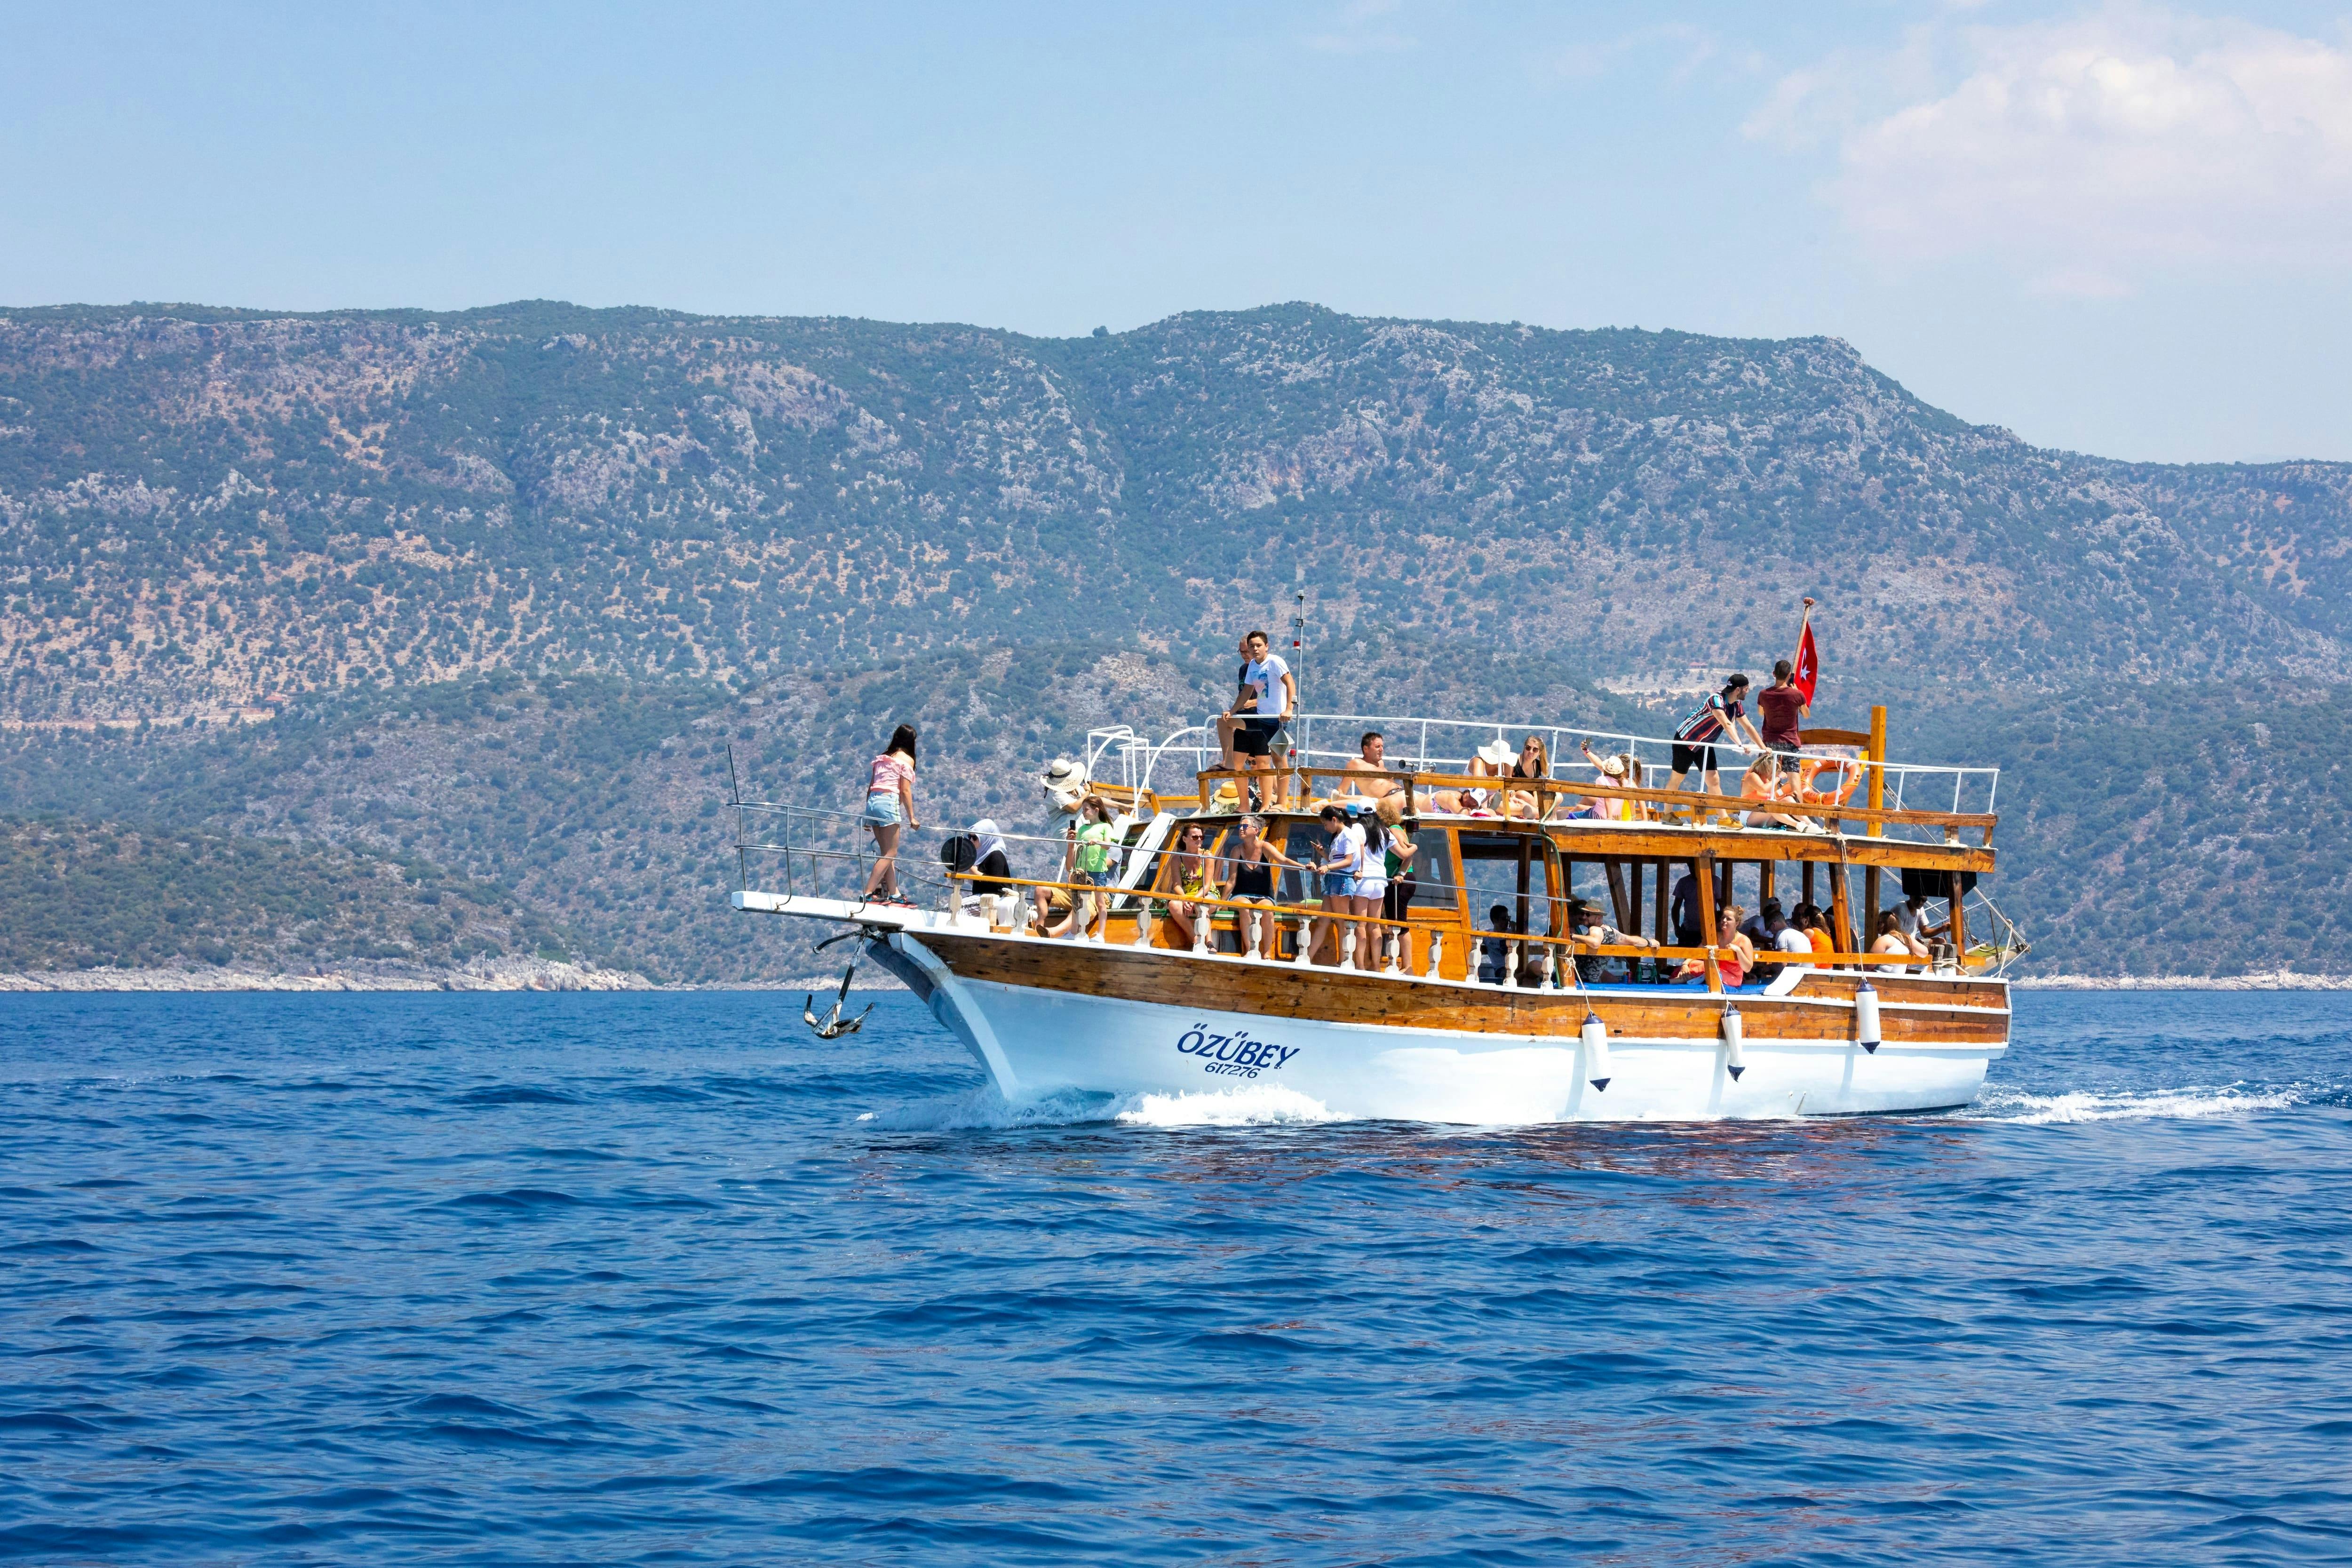 Kekova, Myra and St Nicholas Tour with Lunch and Boat Trip